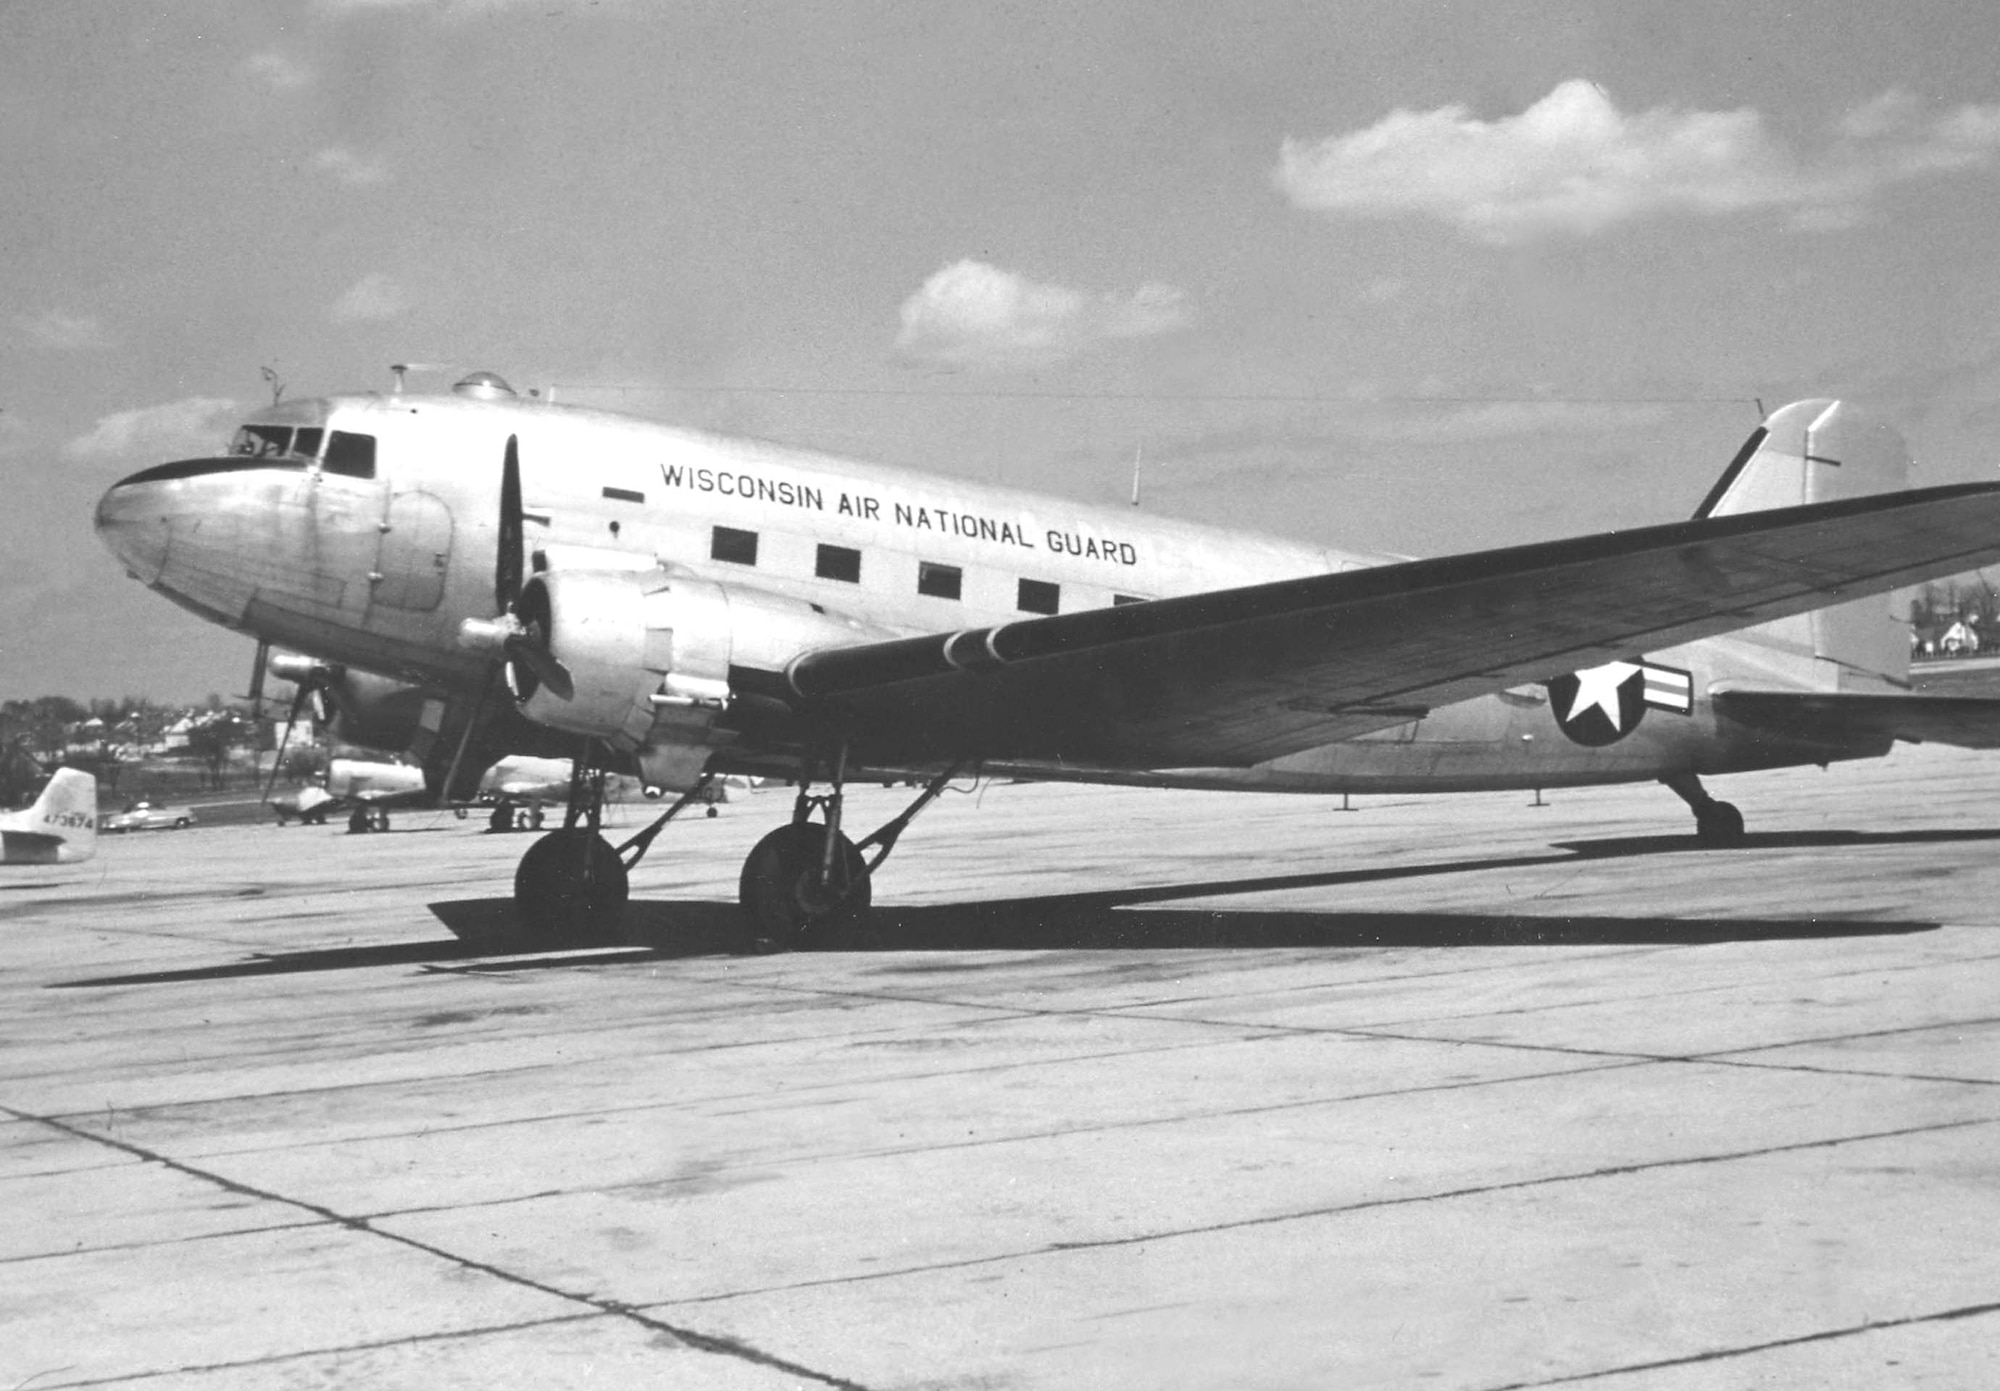 Mc Donnell-Douglas C-47 " Skytrain" was used by the 126th from 1947-1960 as a cargo hauler and troop transport.